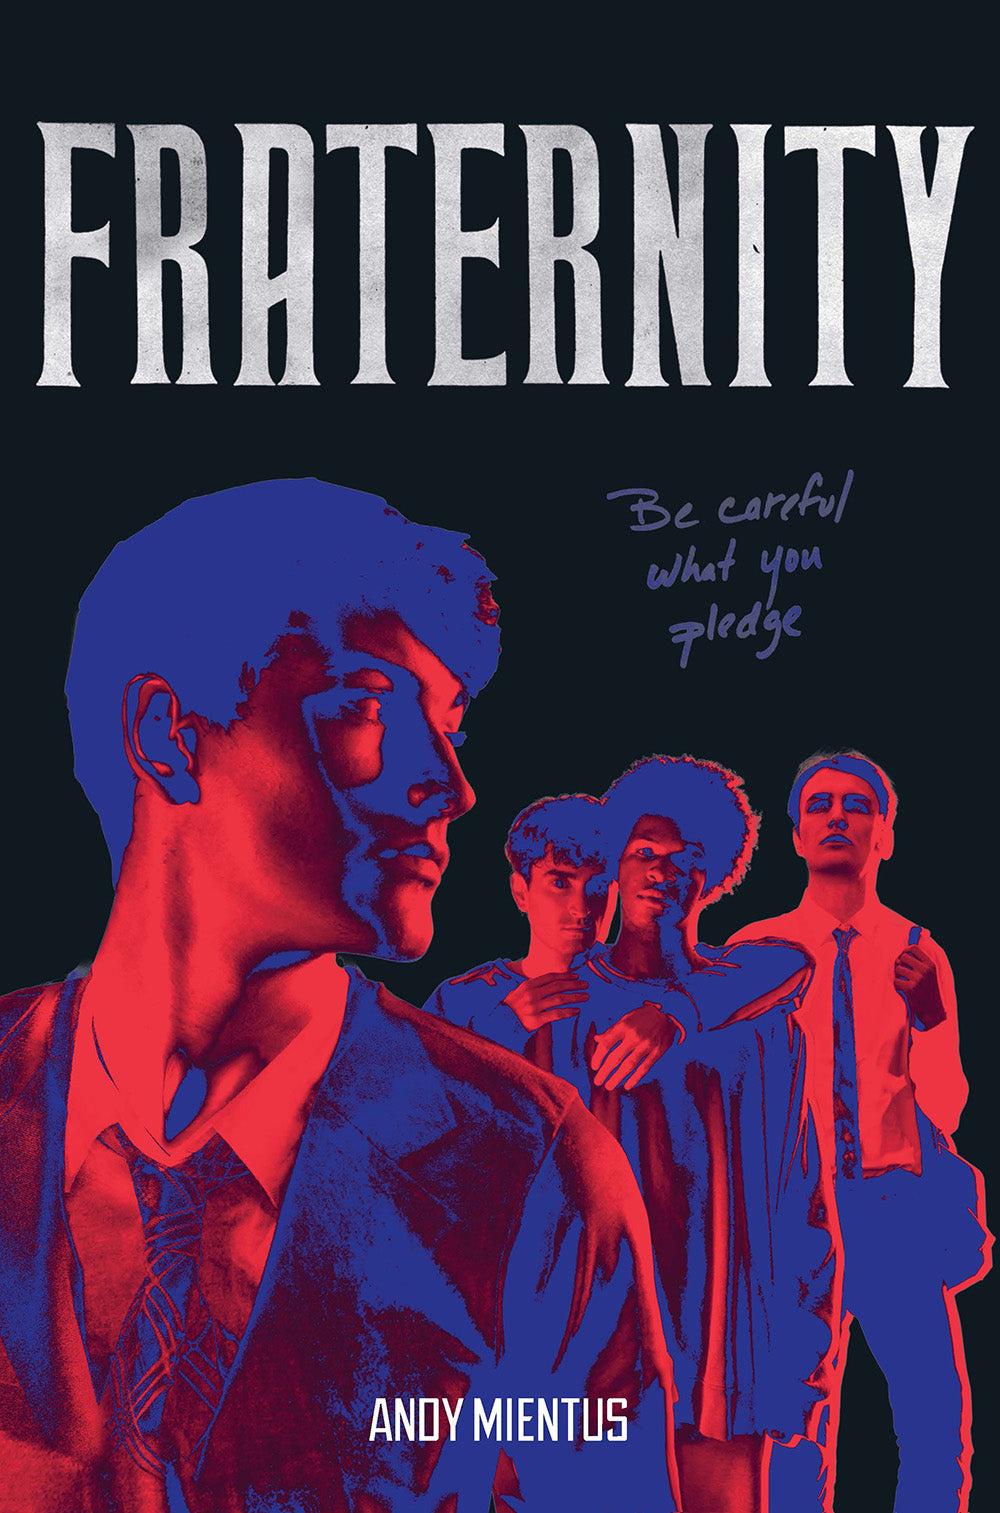 Fraternity by Andy Mientus (used.)